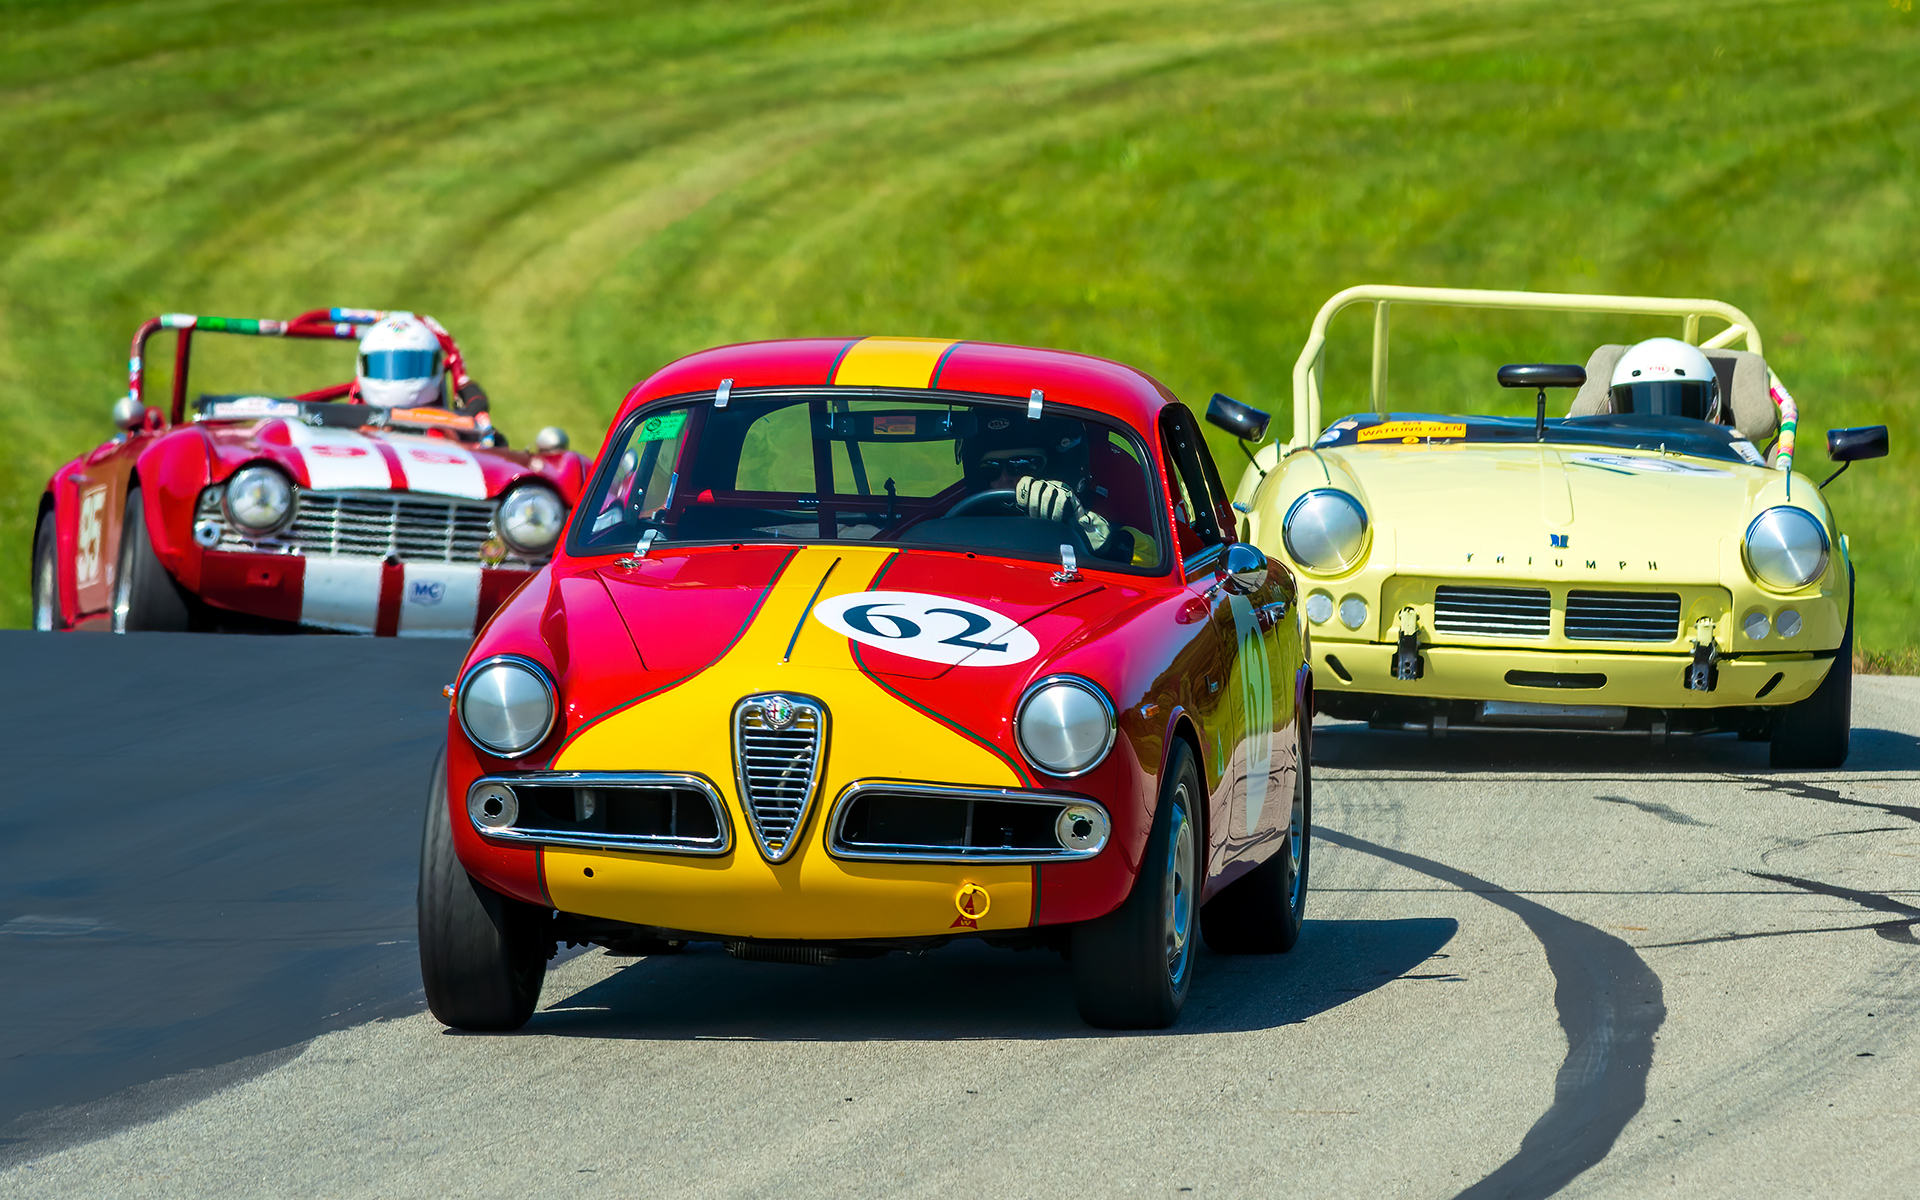 Alfa Romeo and two Triumphs road racing on hilly course. : Cars : Dan Sheehan Photographs - Fine Art Stock Photography